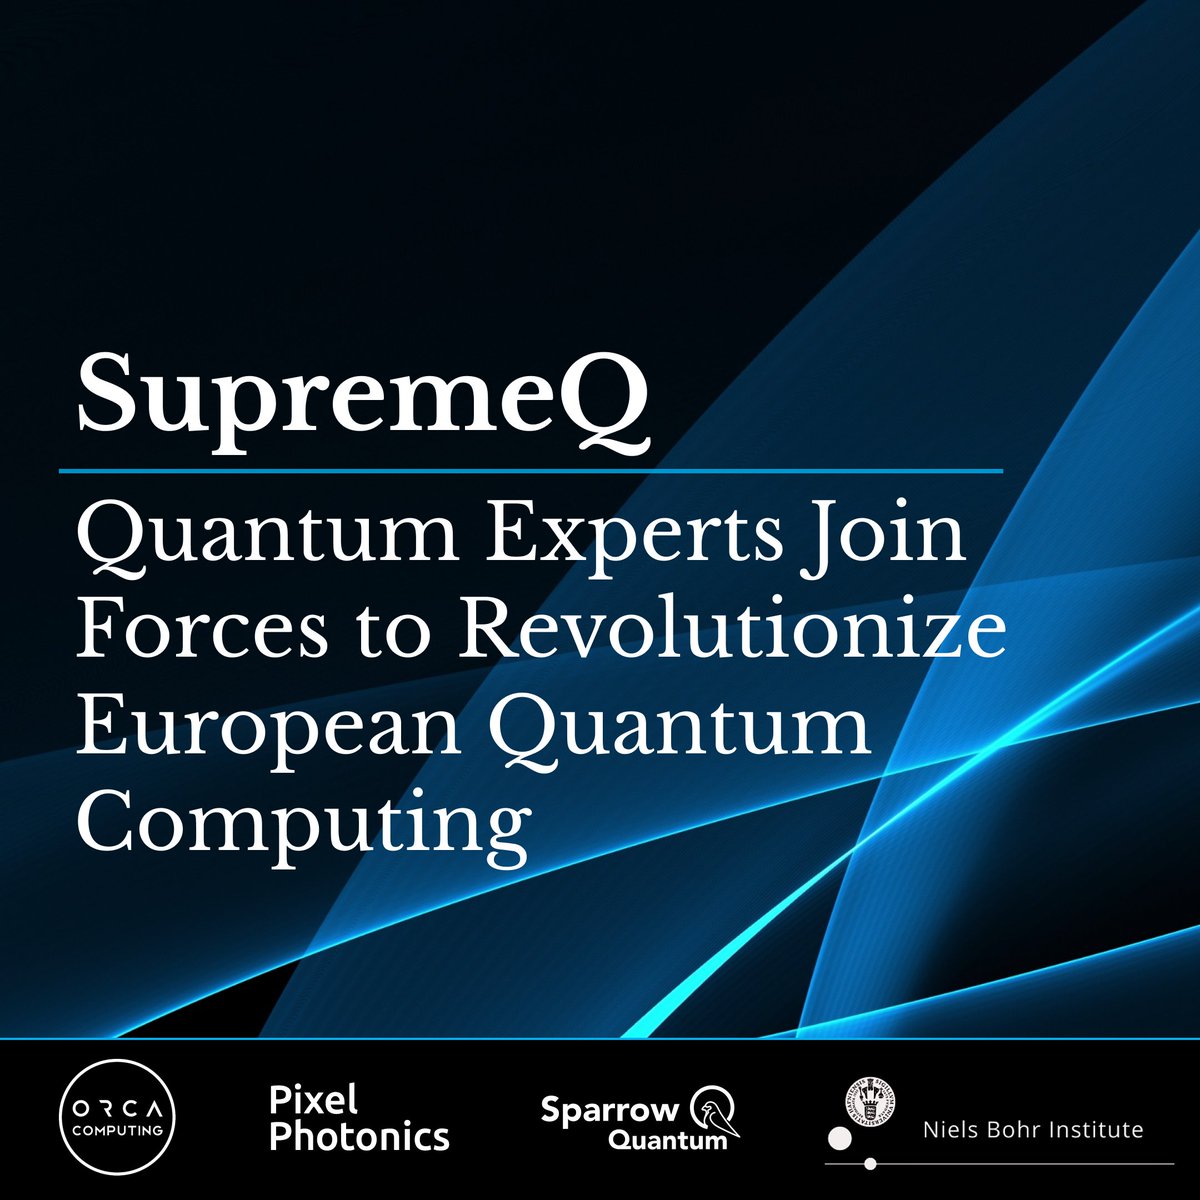 NEWS: ORCA joined forces with @sparrow_quantum, Pixel Photonics, and the Niels Bohr Institute (NBI) on the Eurostar project 'SupremeQ. The consortium will drive breakthrough innovation for quantum advantage. Learn more 👉 bit.ly/3TbtDPw #quantumcomputing #photonics